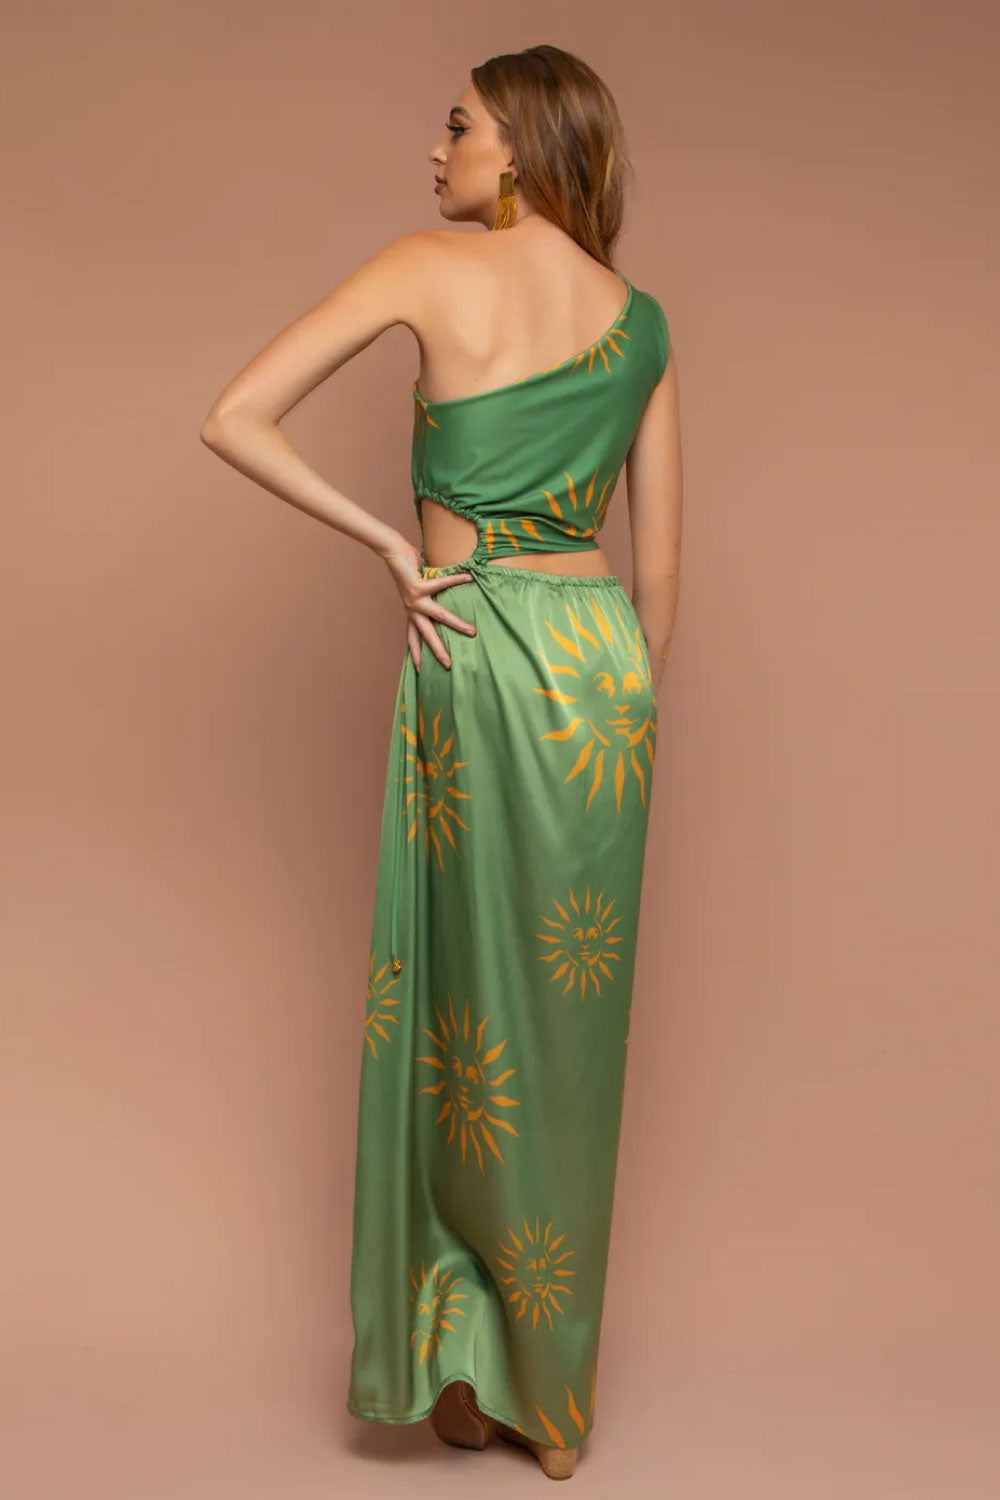 Image of the back of Mar A Mar's Sole Dress in Green on a model.